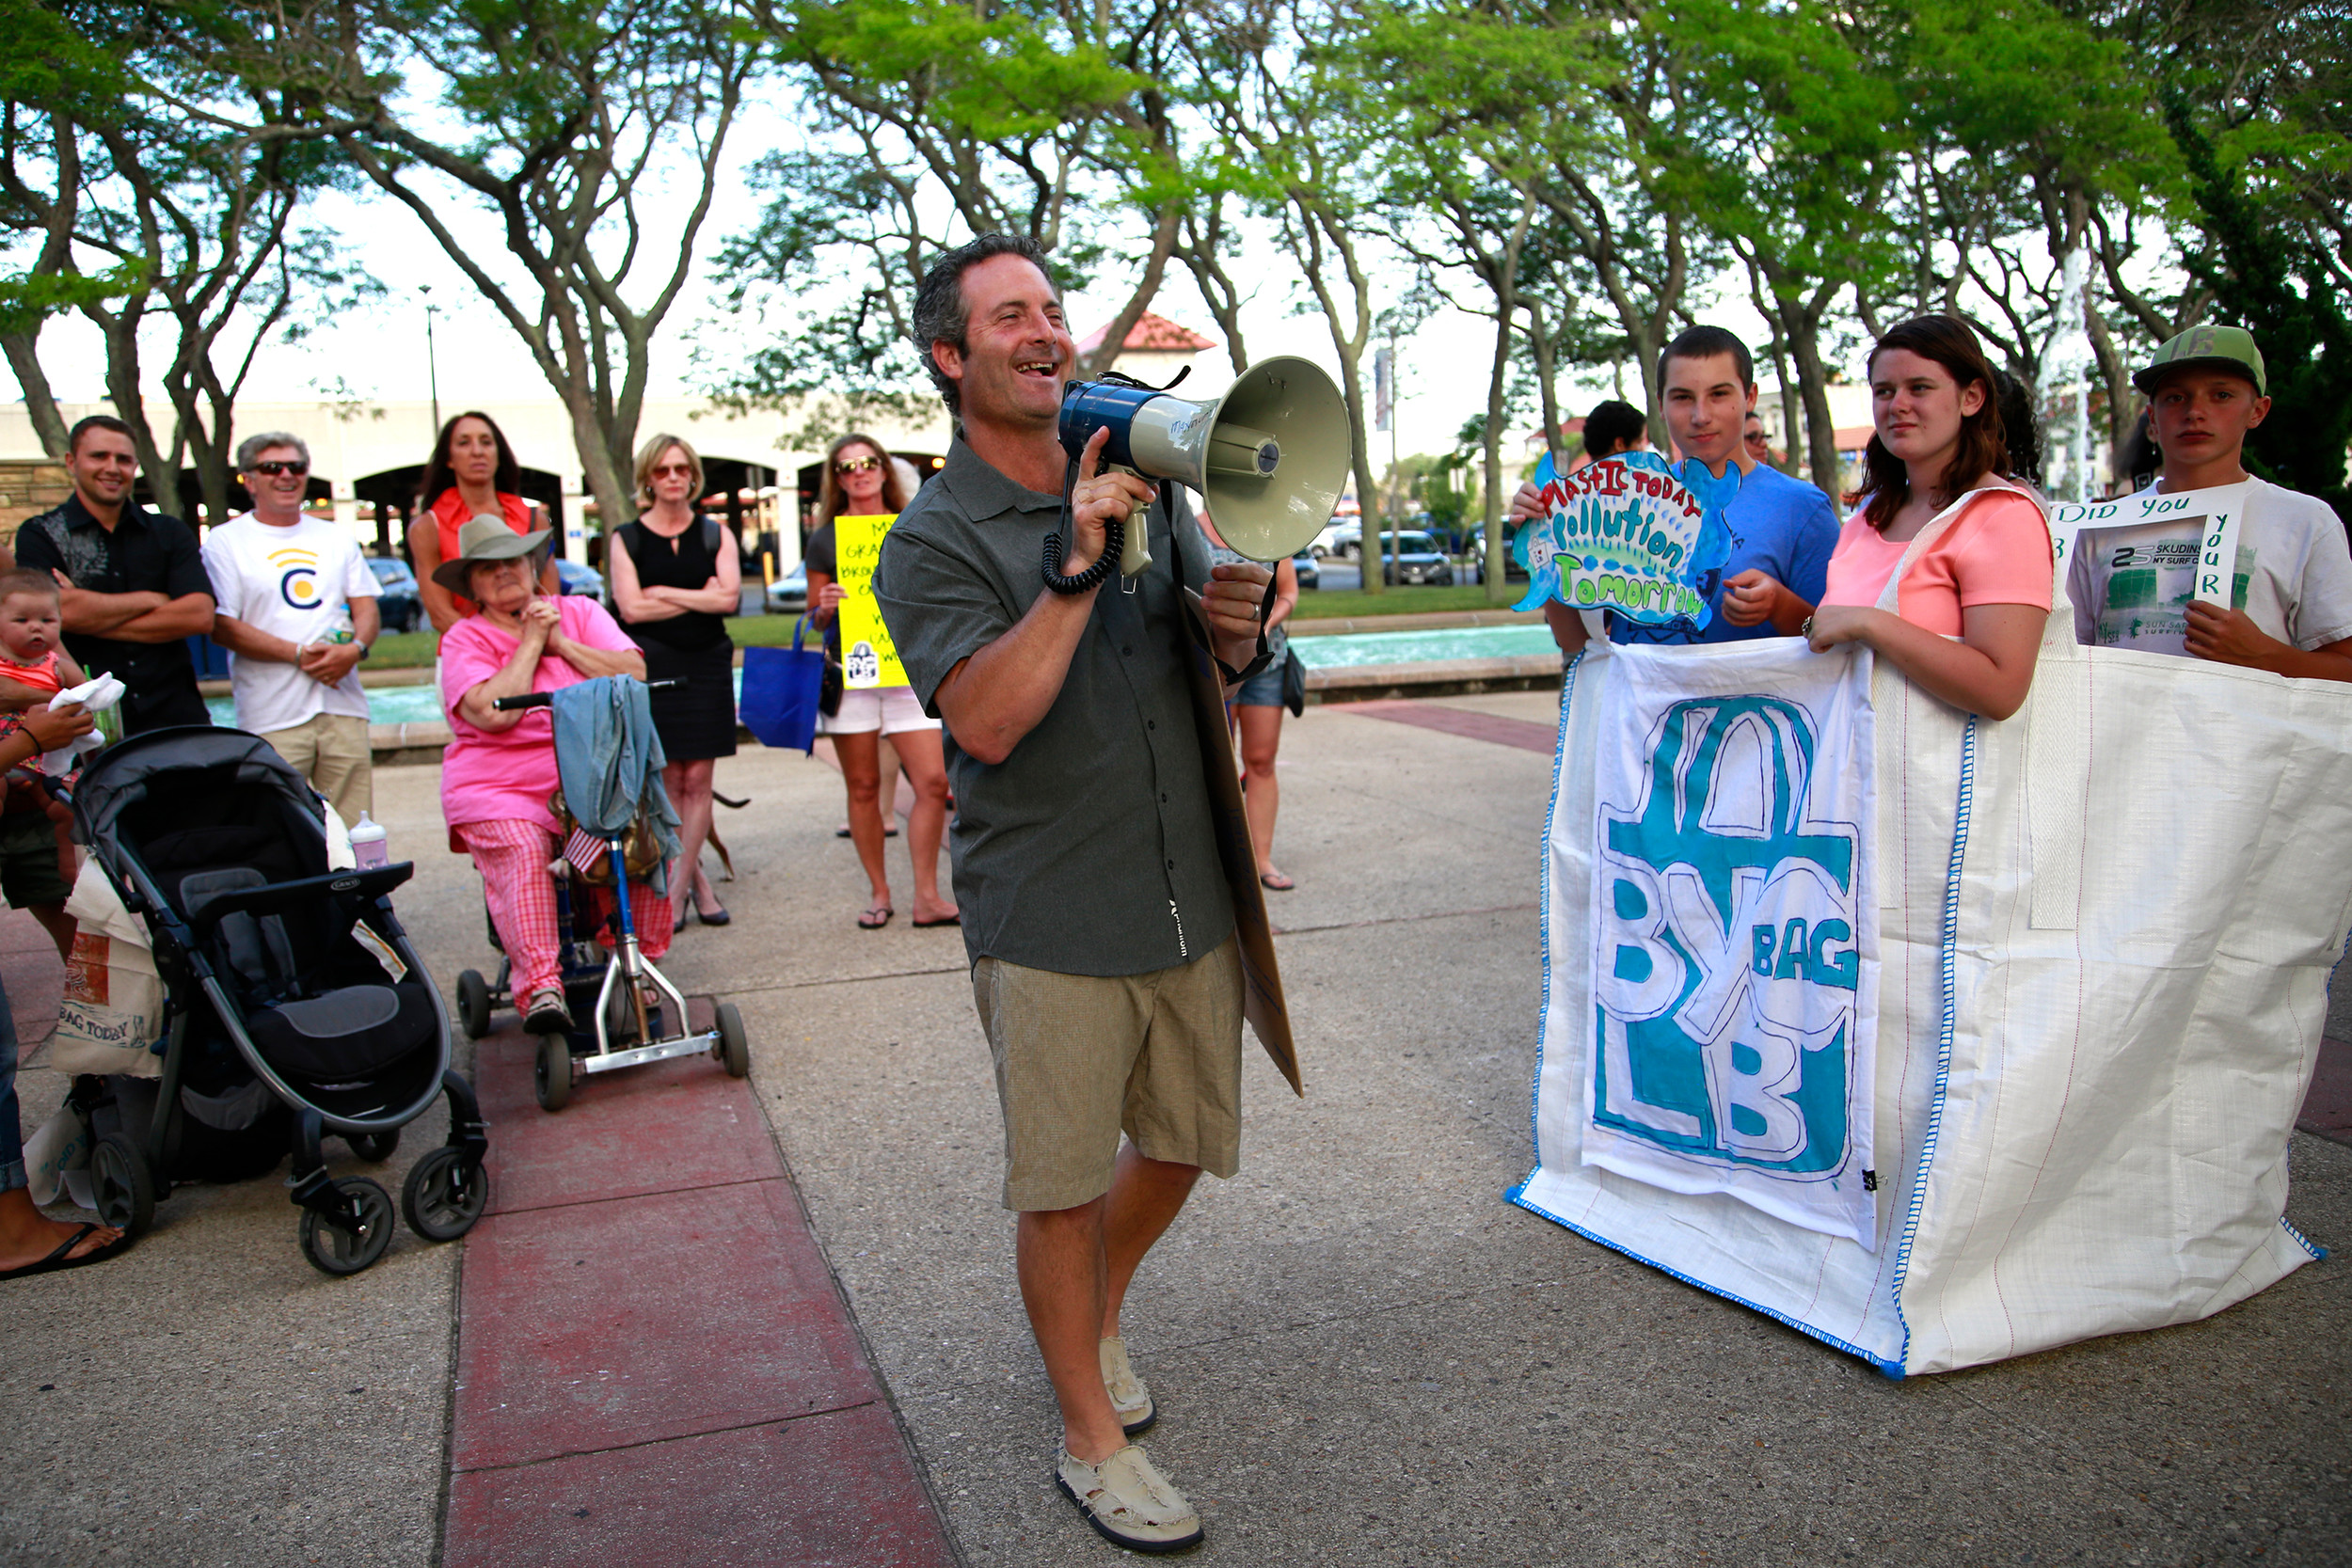 George Povall, of All Our Energy, led the rally, which called for a city ban of single-use plastic bags.